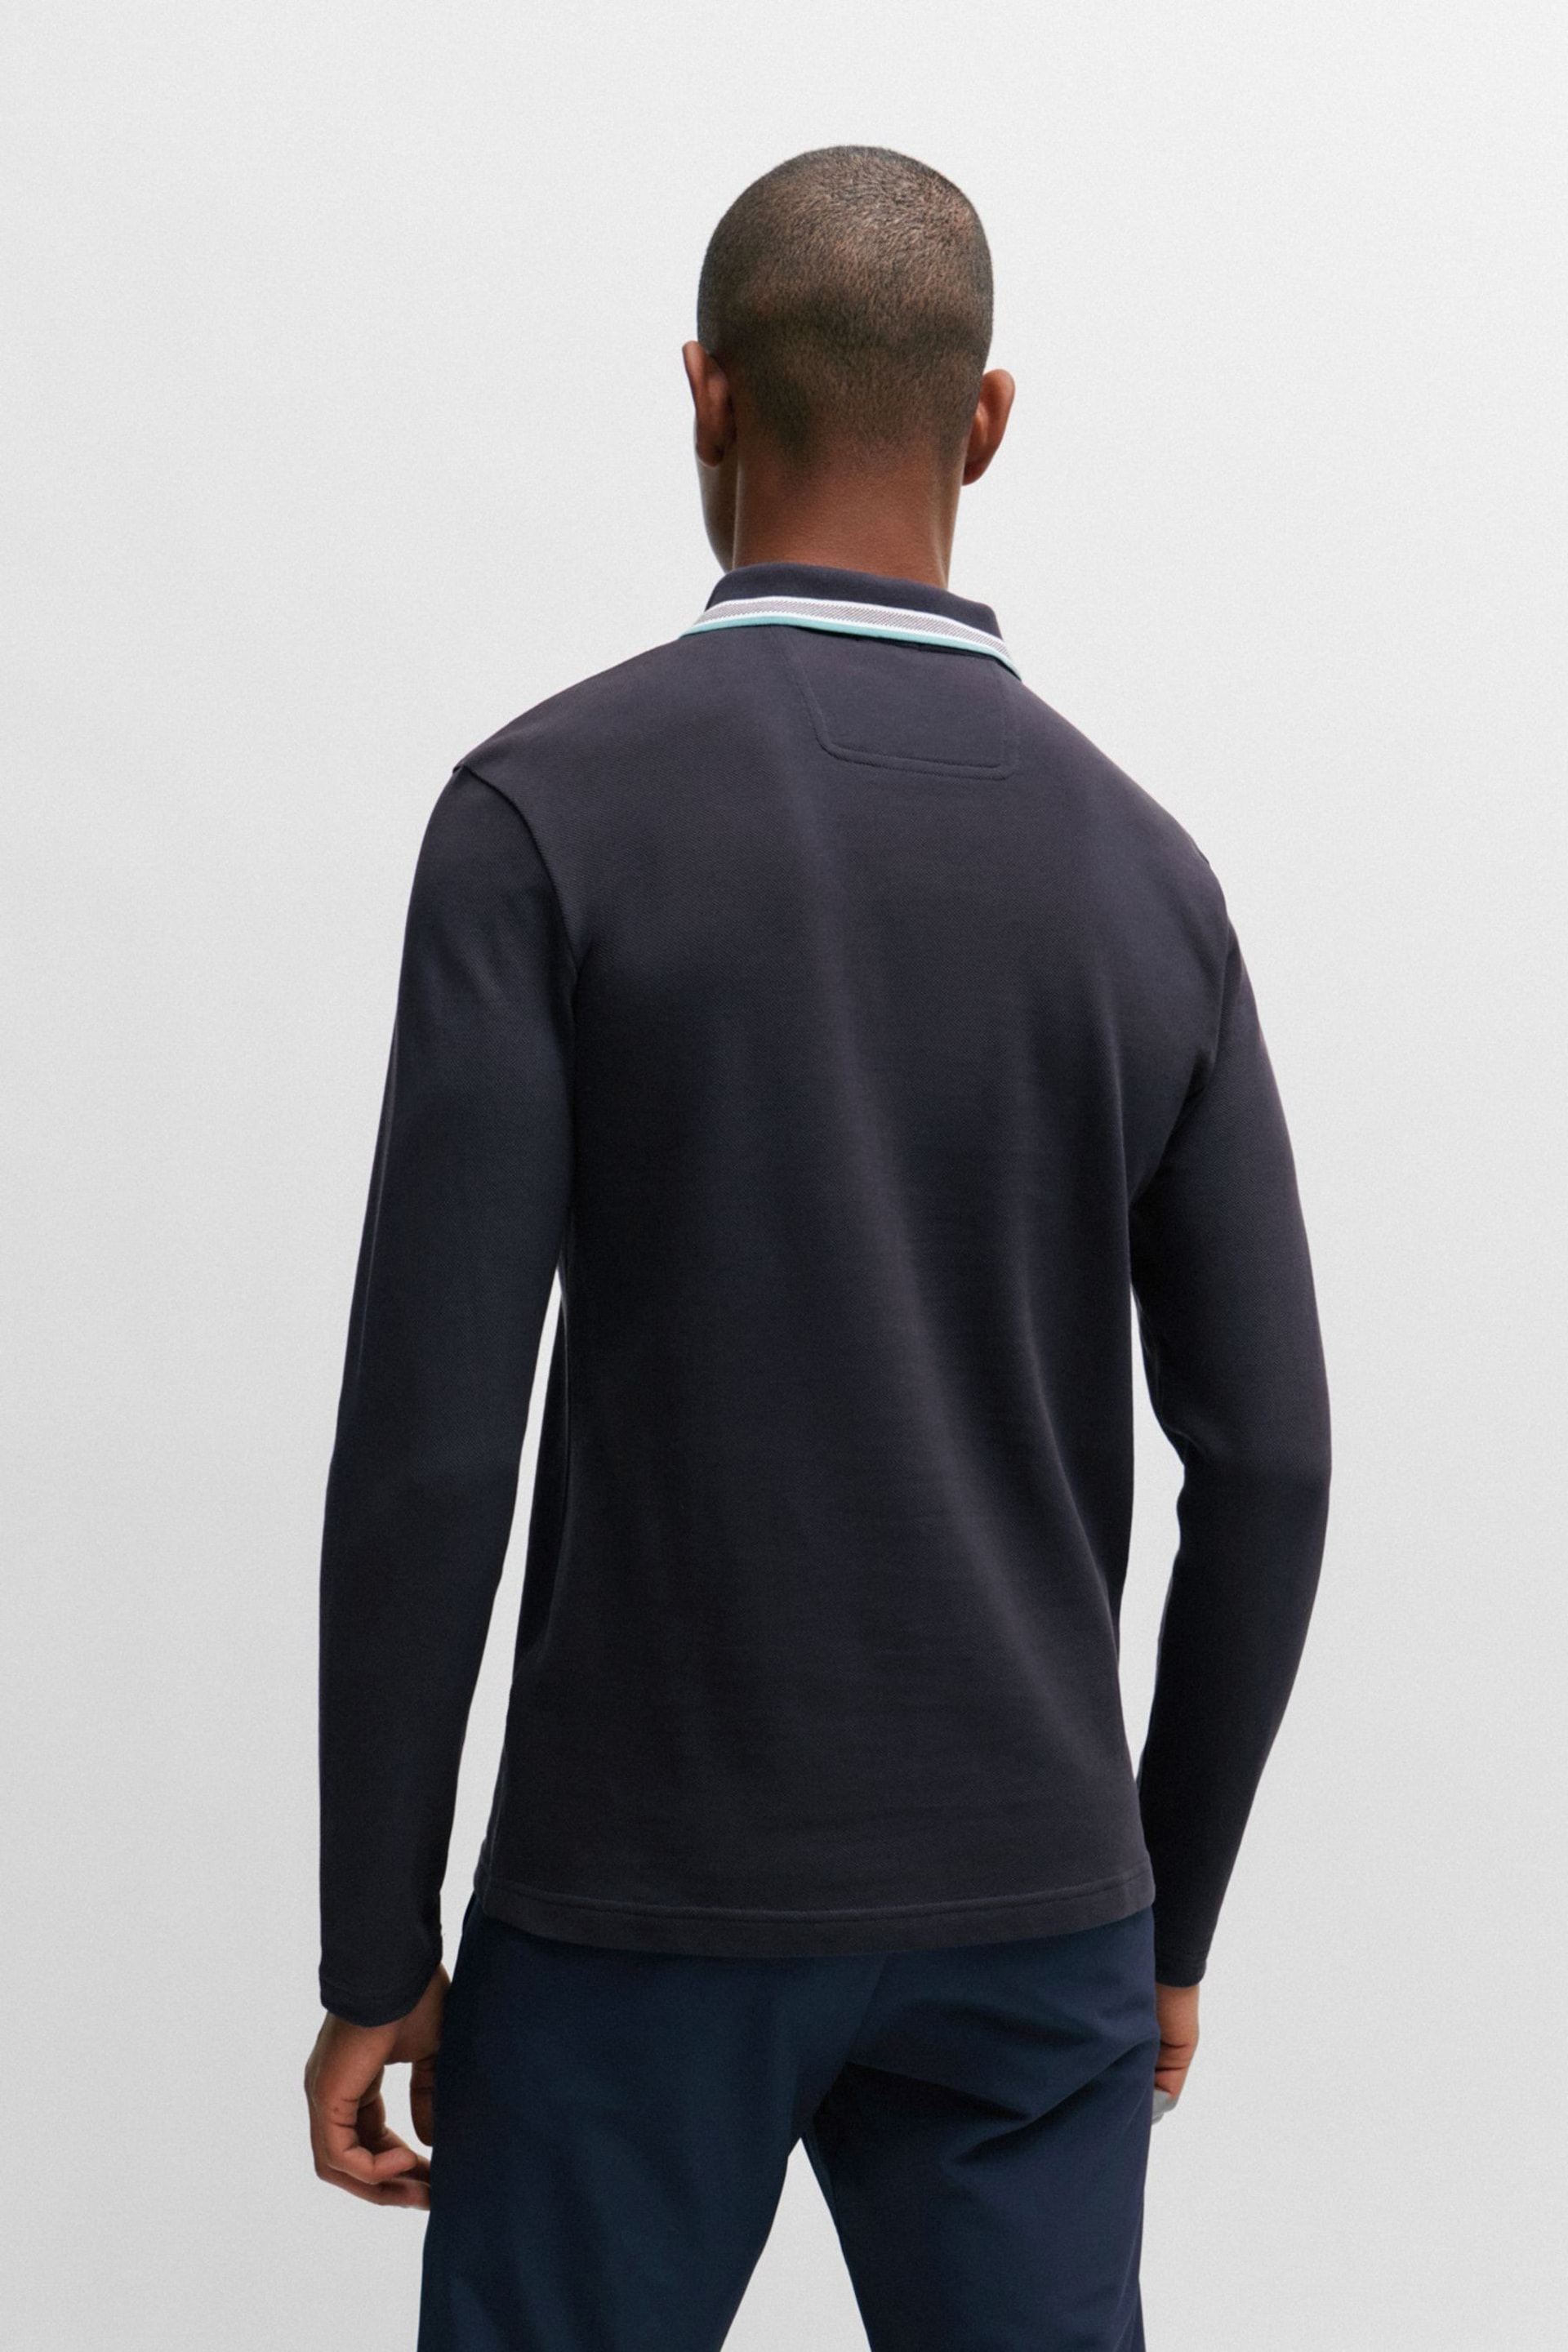 BOSS Blue Tipped Collar Long Sleeve Polo Shirt - Image 2 of 5